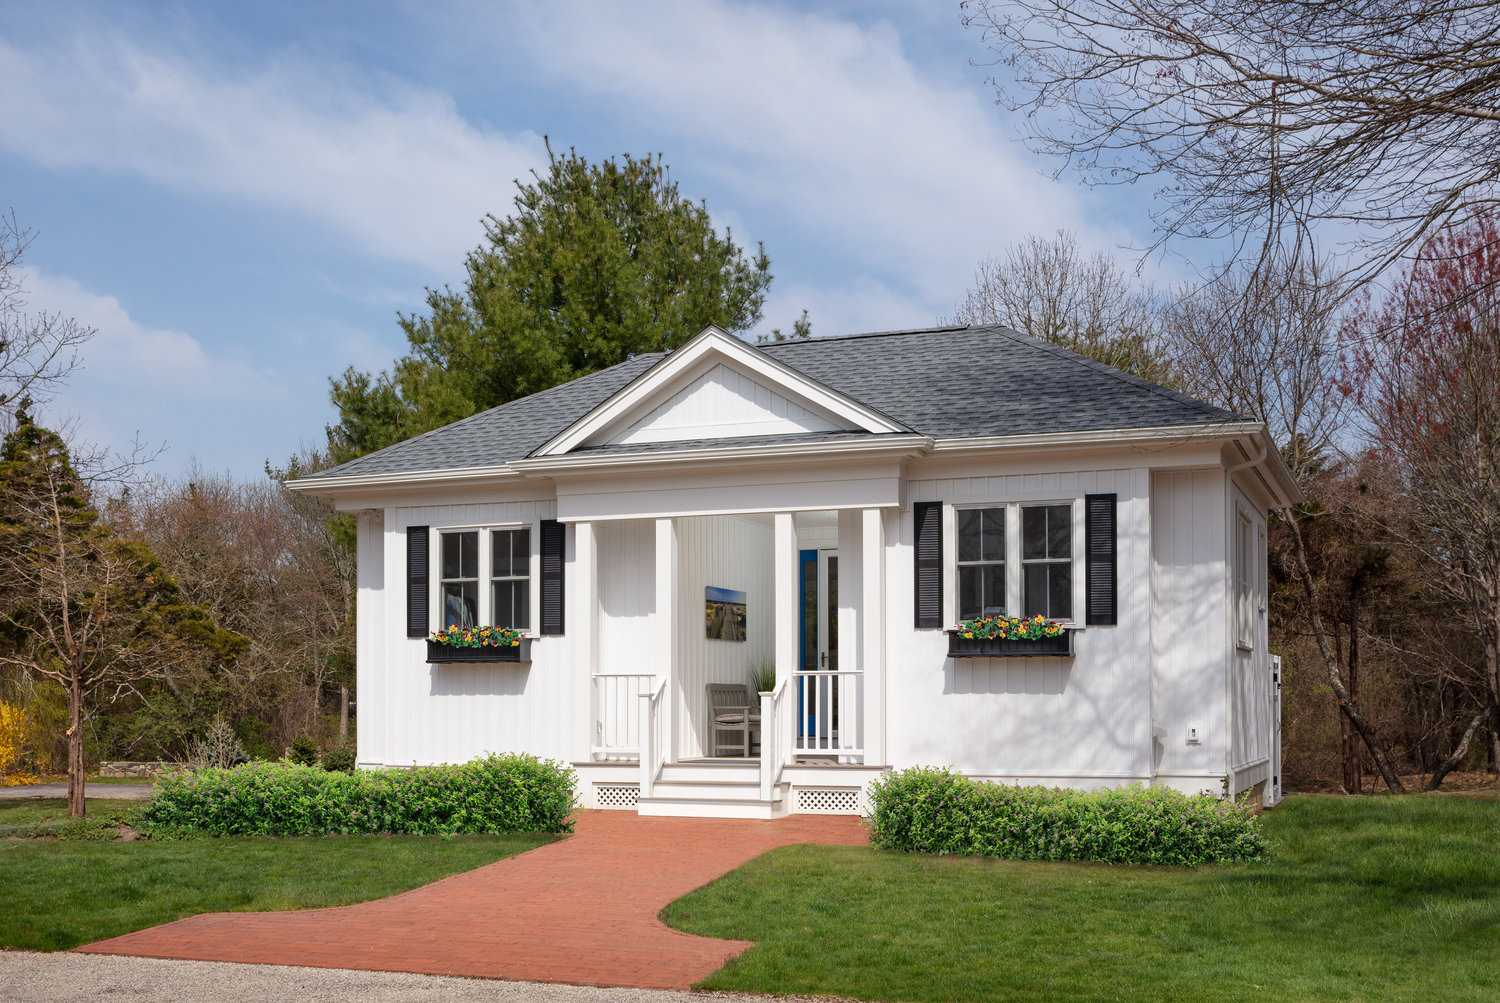 650 square feet of Craftsman cottage charm in South Kingstown